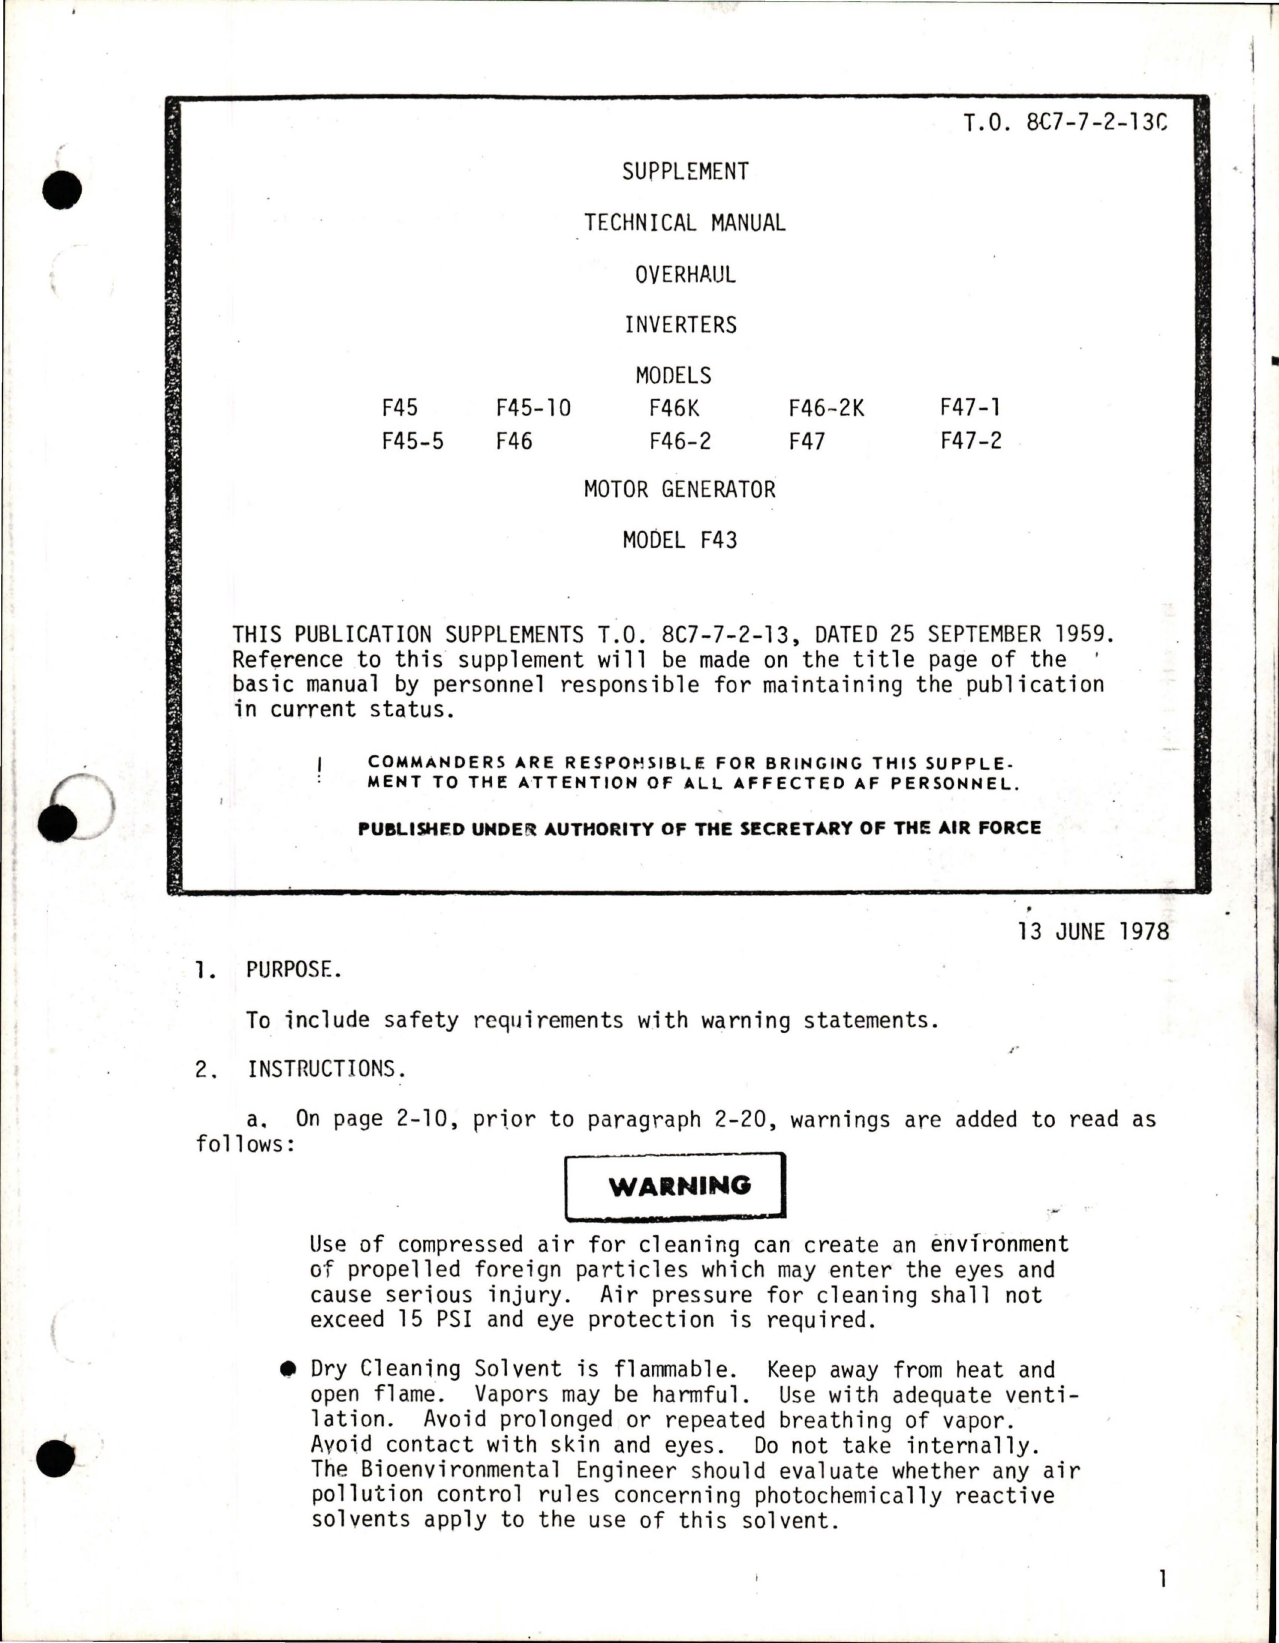 Sample page 1 from AirCorps Library document: Supplement to Overhaul for Inverters and Motor Generator - Model F43